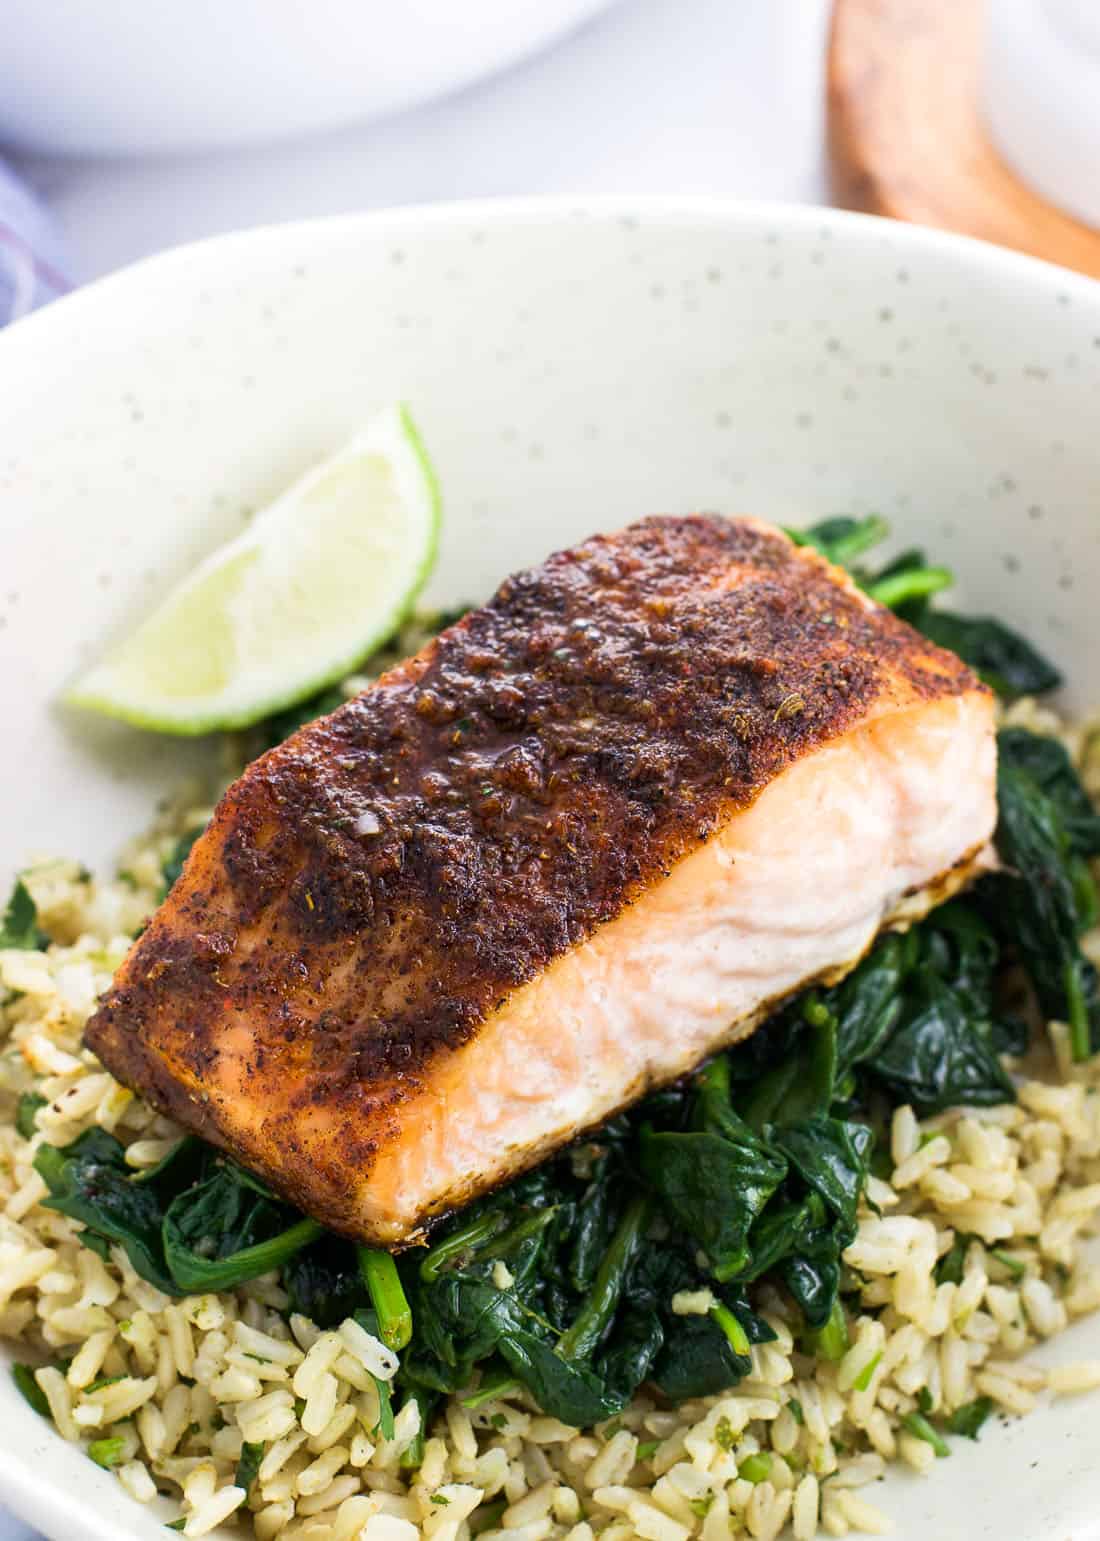 A baked salmon fillet served on a bed of sauteed spinach over rice